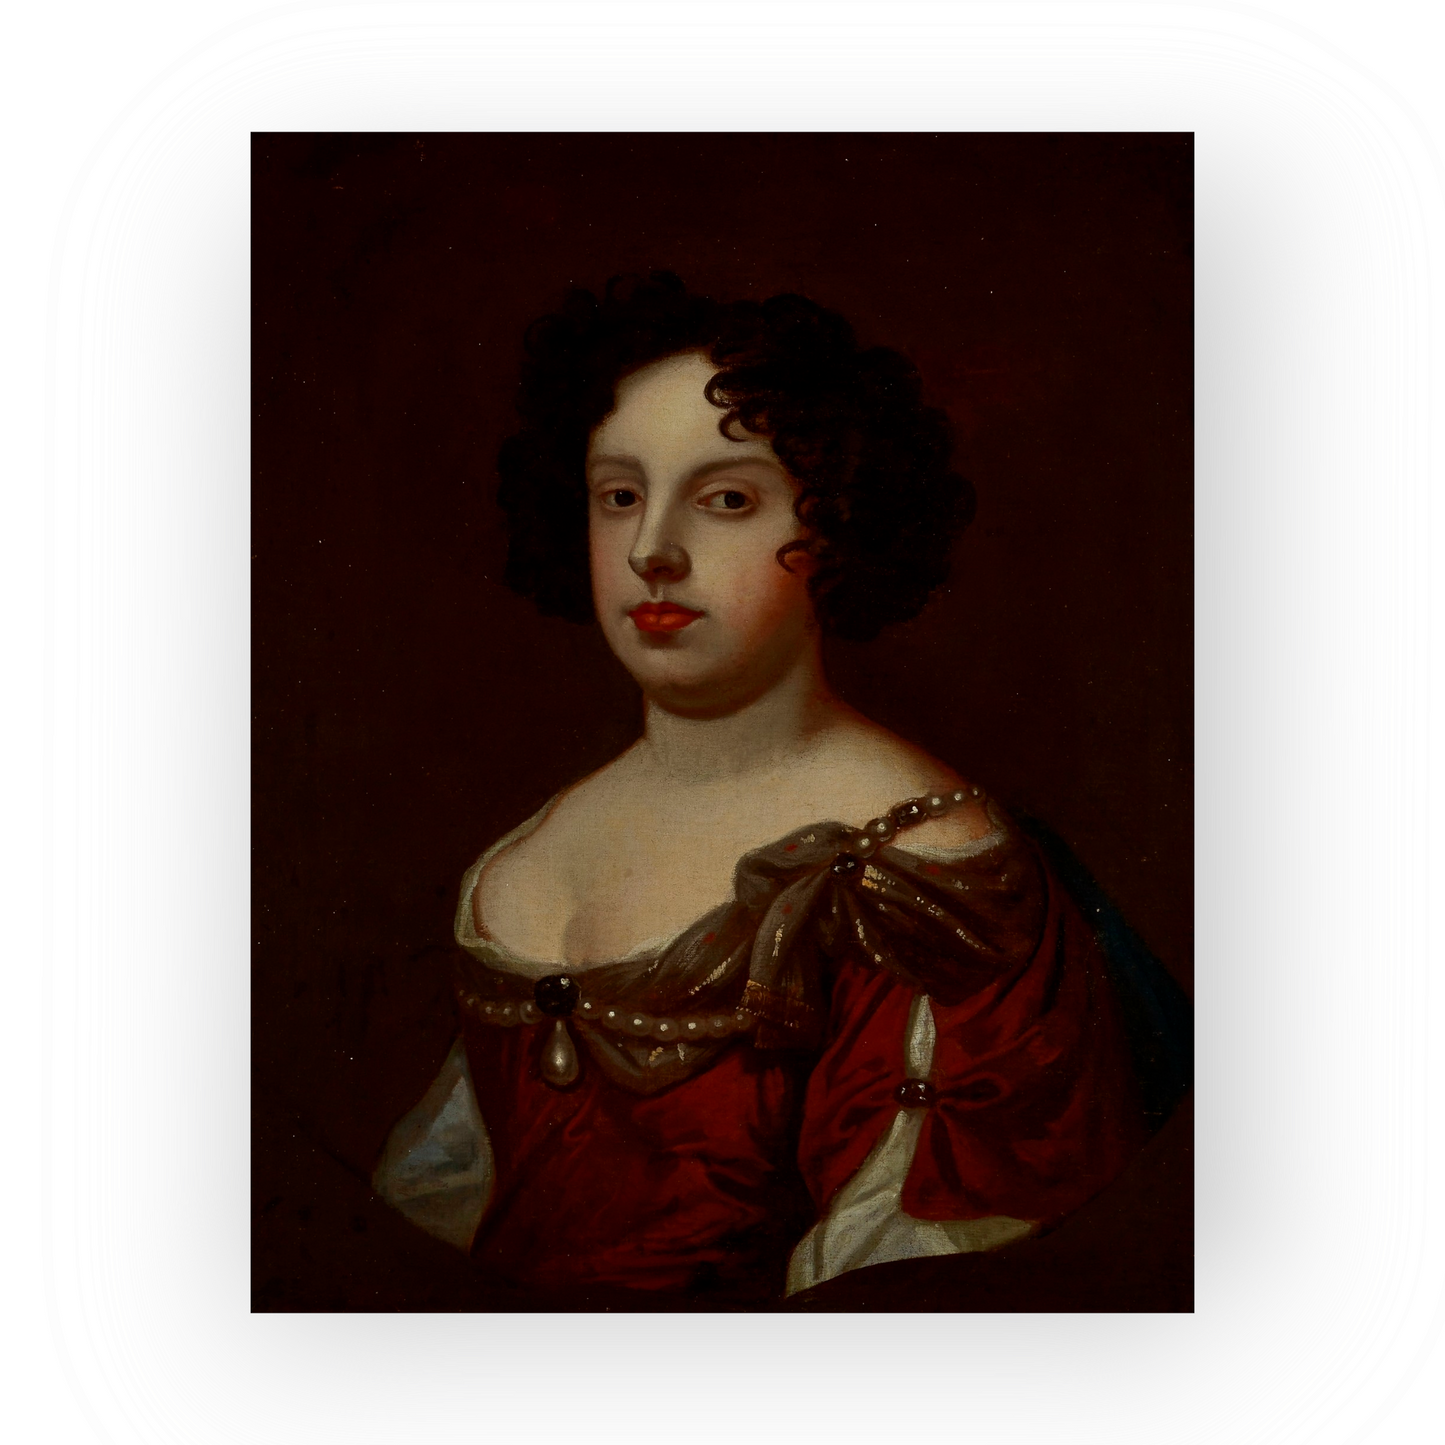 After Sir Peter Lely (1618-1680) - 17th Century English School Antique Oil On Canvas Portrait of Eleanora Lee, Lady Norreys, Later The Countess of Abingdon (1658-1691)